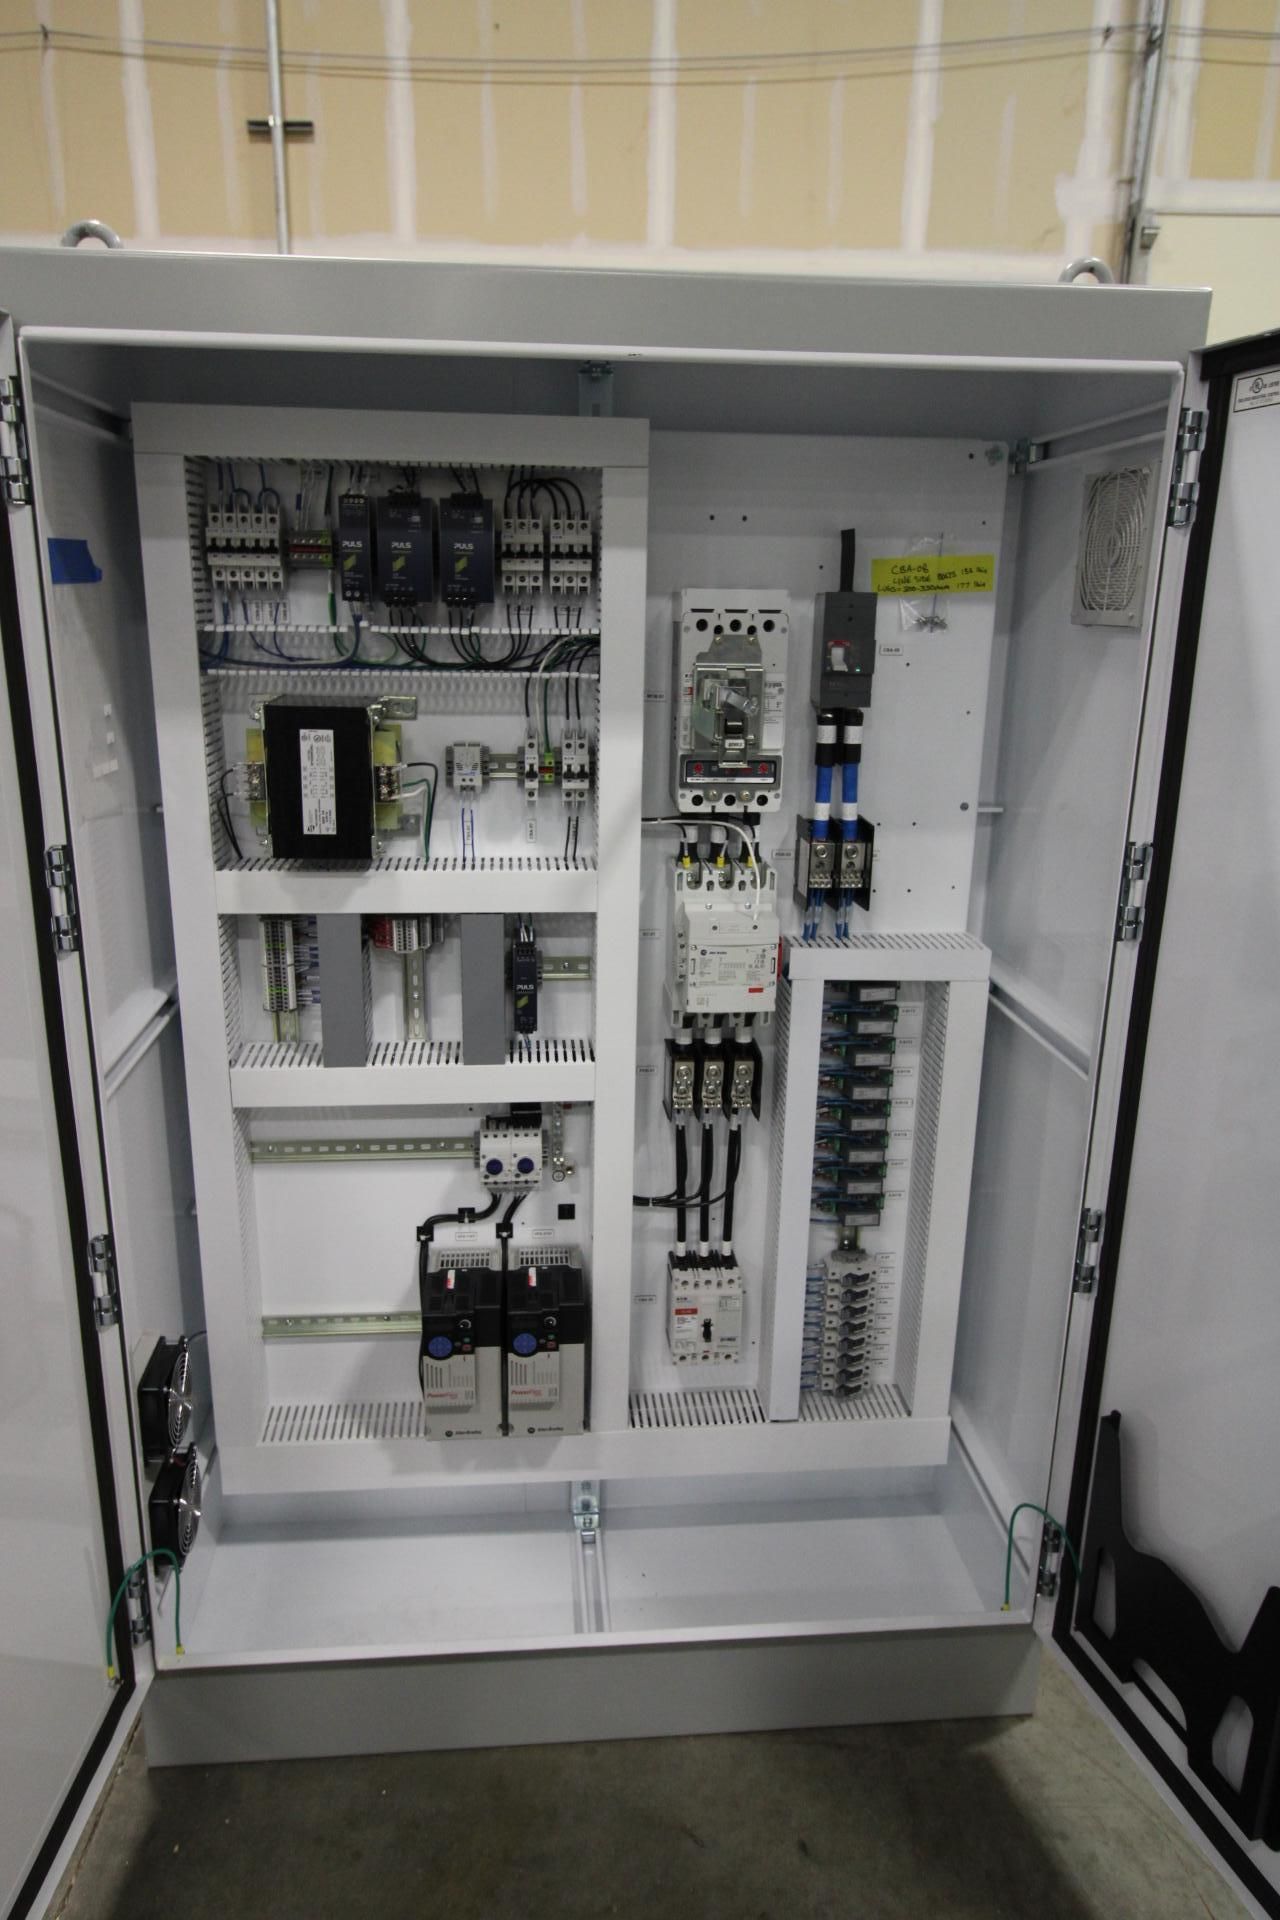 LOT OF MI SYSTEMS WORK IN PROGRESS: 3rd Generation test unit, consisting of frame w/pumps, monitors, - Image 16 of 34